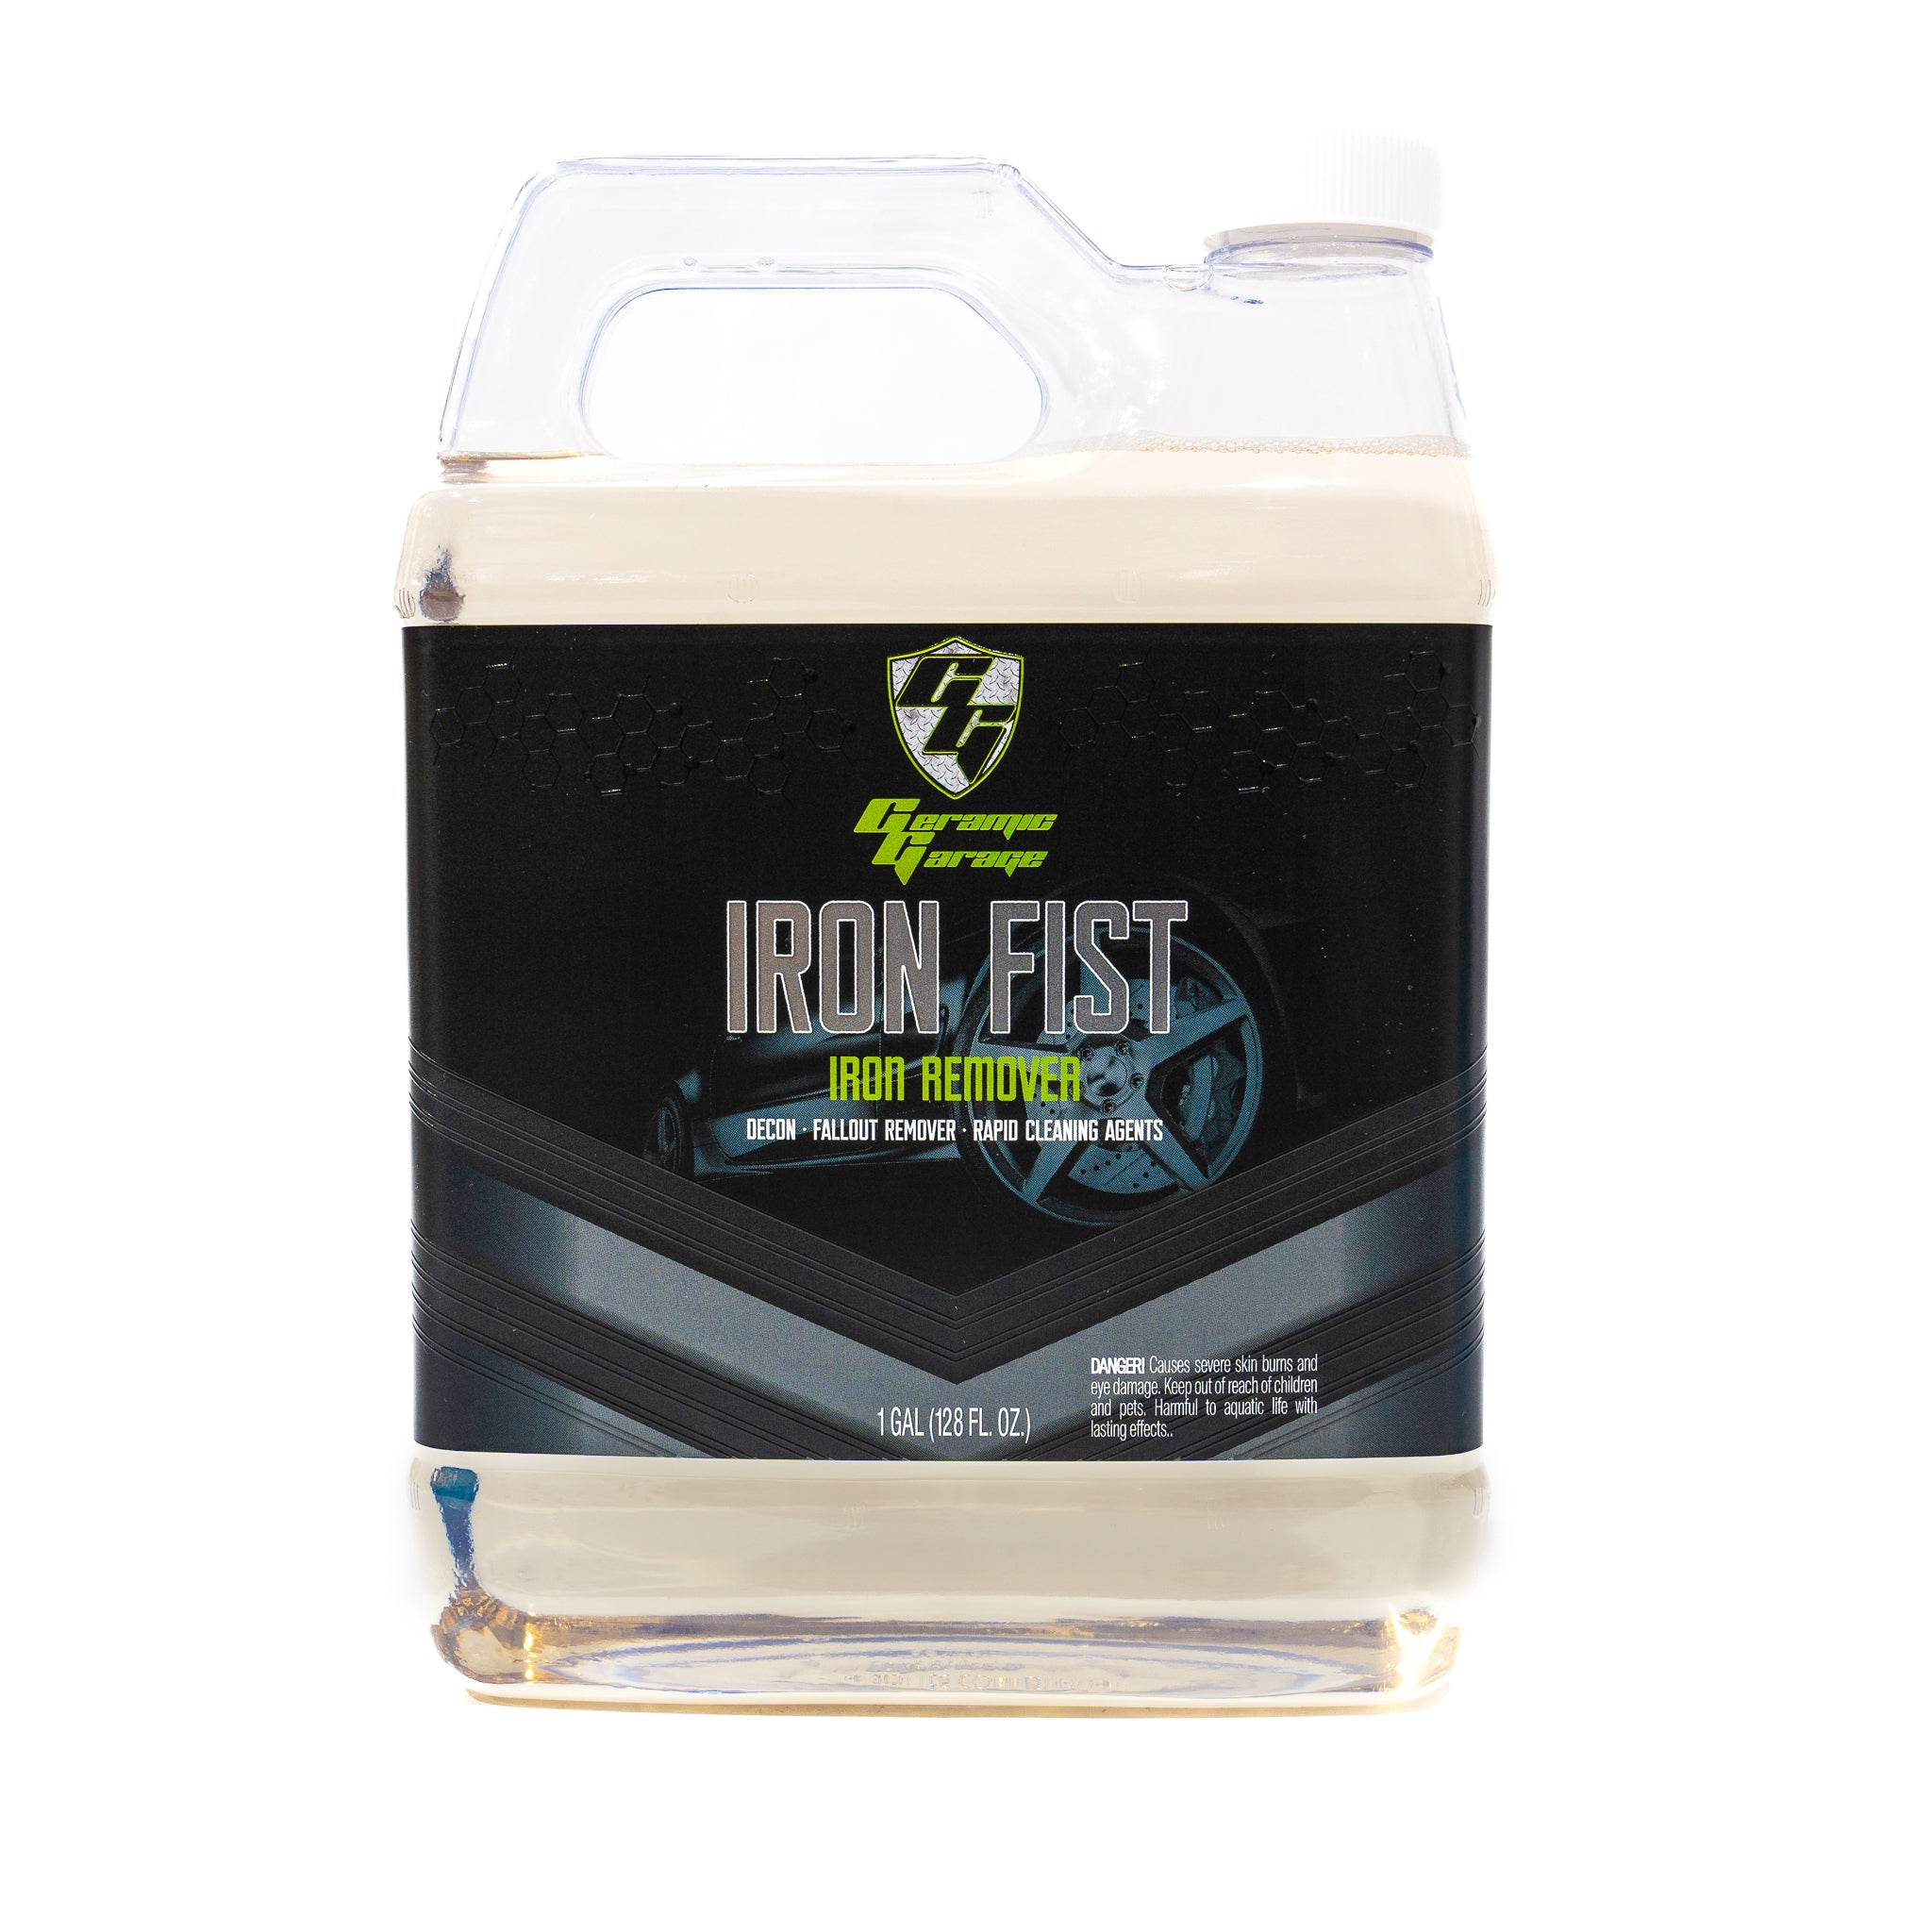 Iron Fist Iron Remover Car Detailing | Removes Brake Dust, Iron, Metal Debris, and Deposits from Paint, Chrome, Glass, Plastic, Wheels, Etc (1 Gallon)